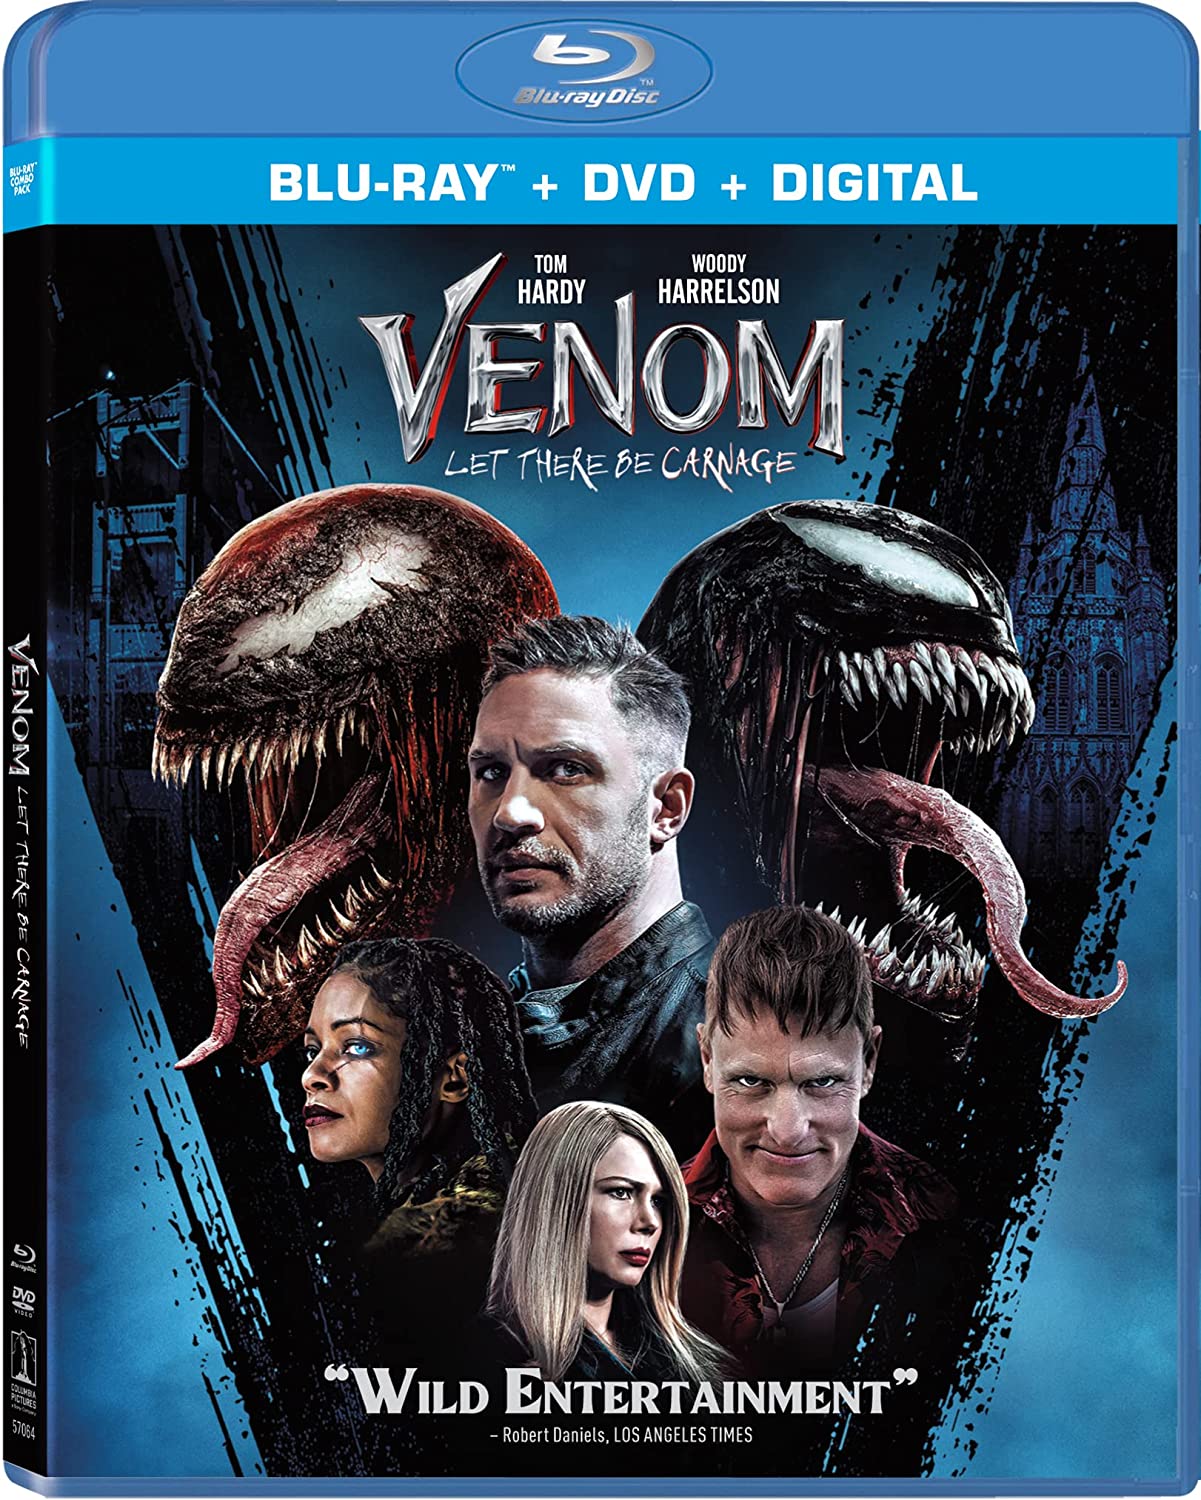 Venom: Let there be Carnage - Amazon